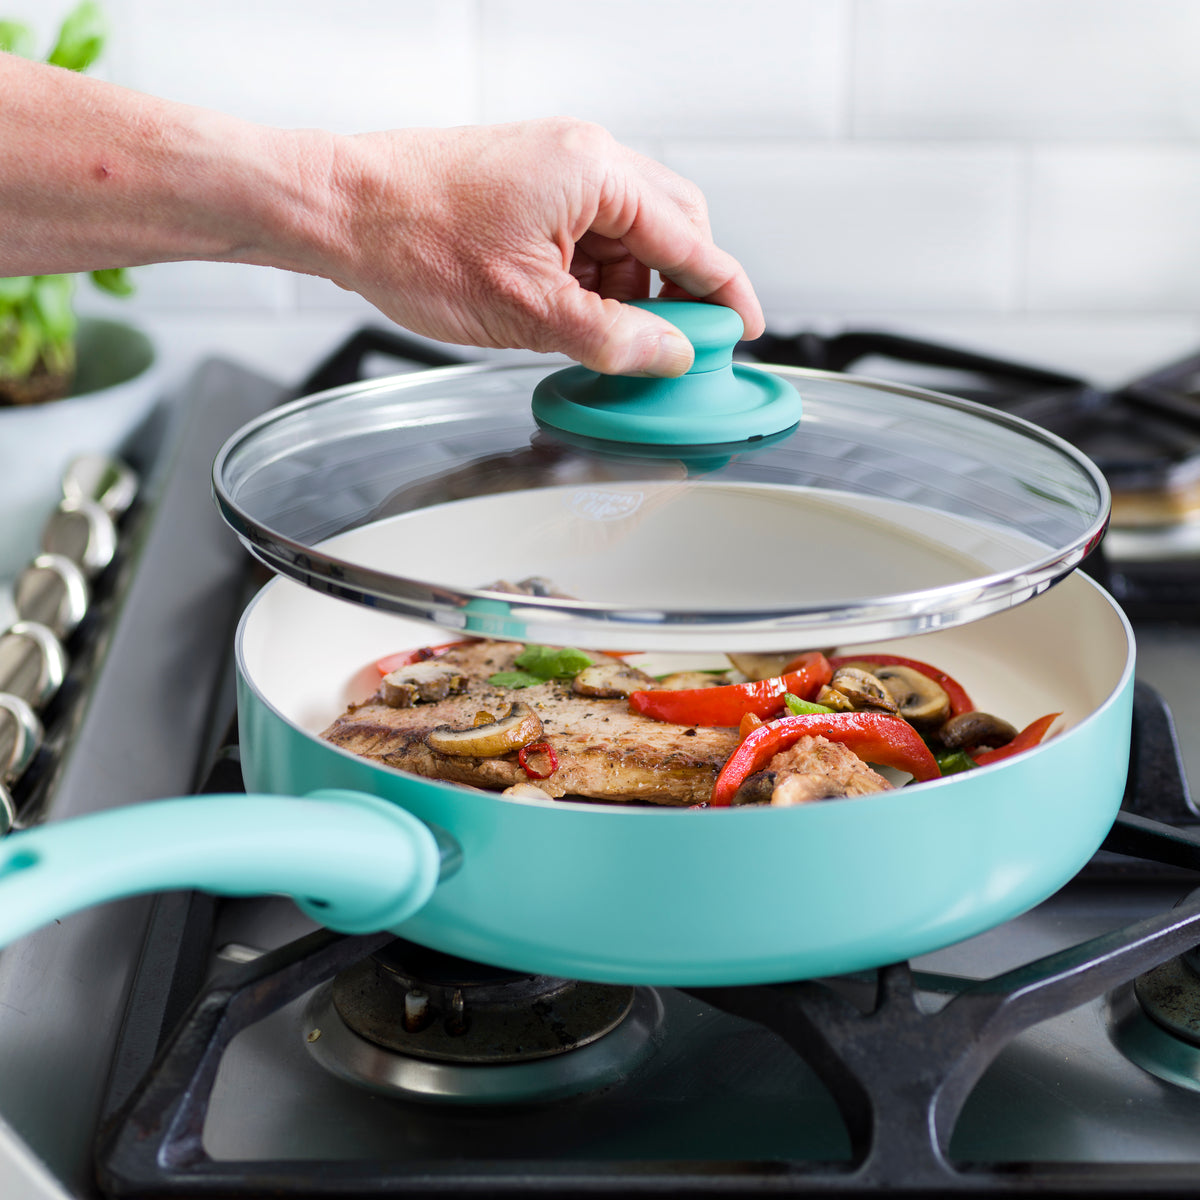 GREENLIFE SOFT GRIP 12PC COOKWARE SETS, TURQUOISE